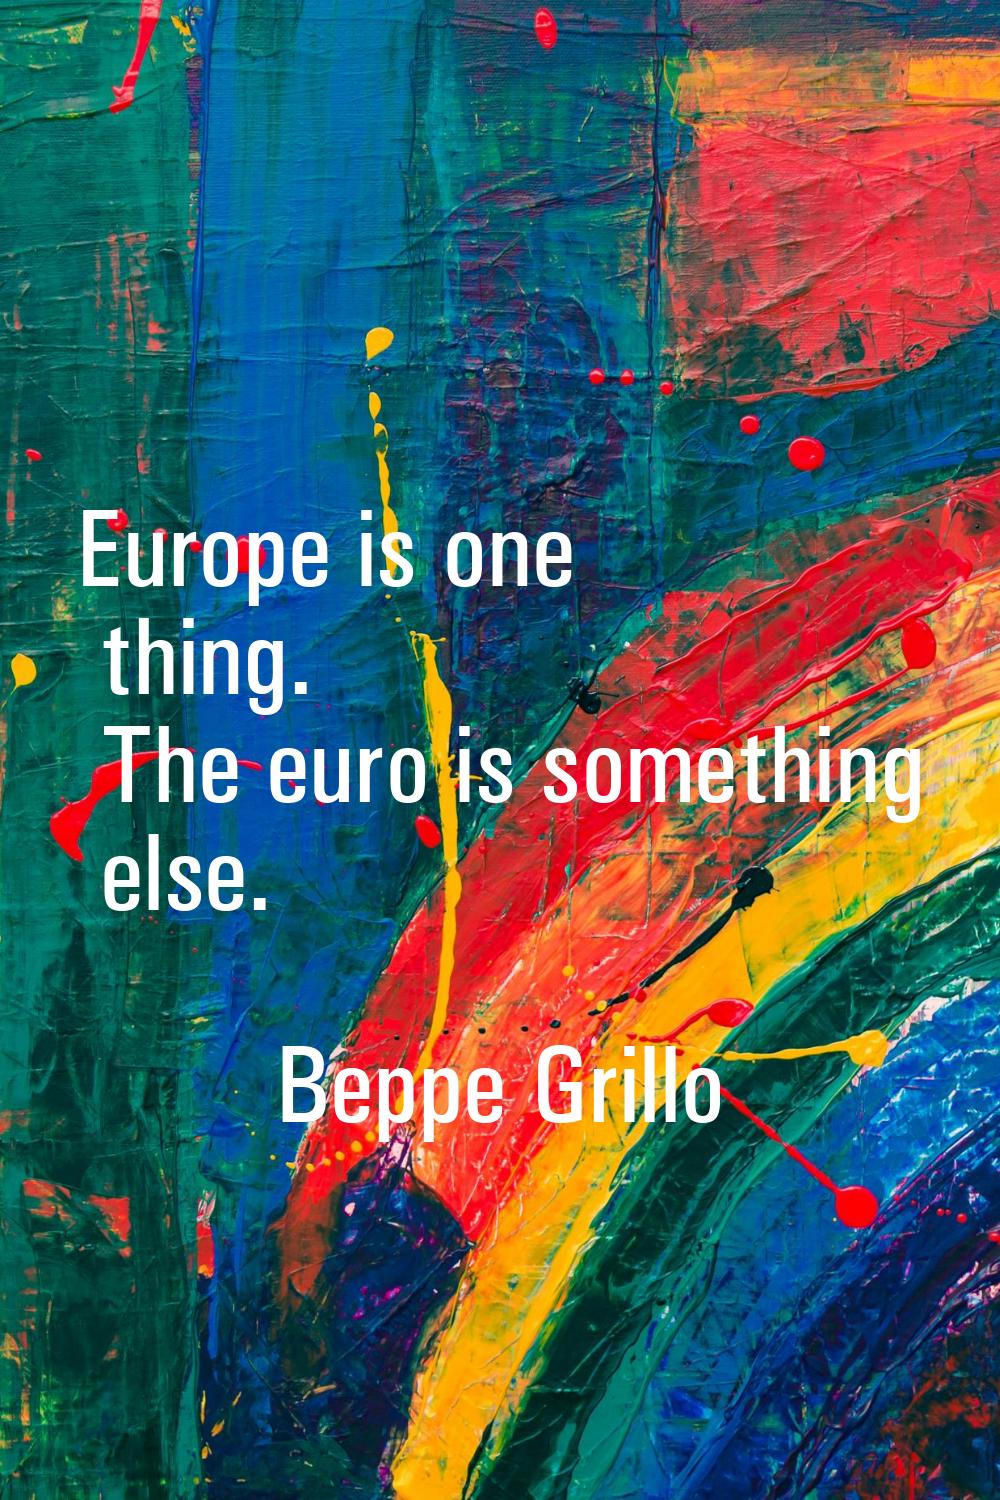 Europe is one thing. The euro is something else.